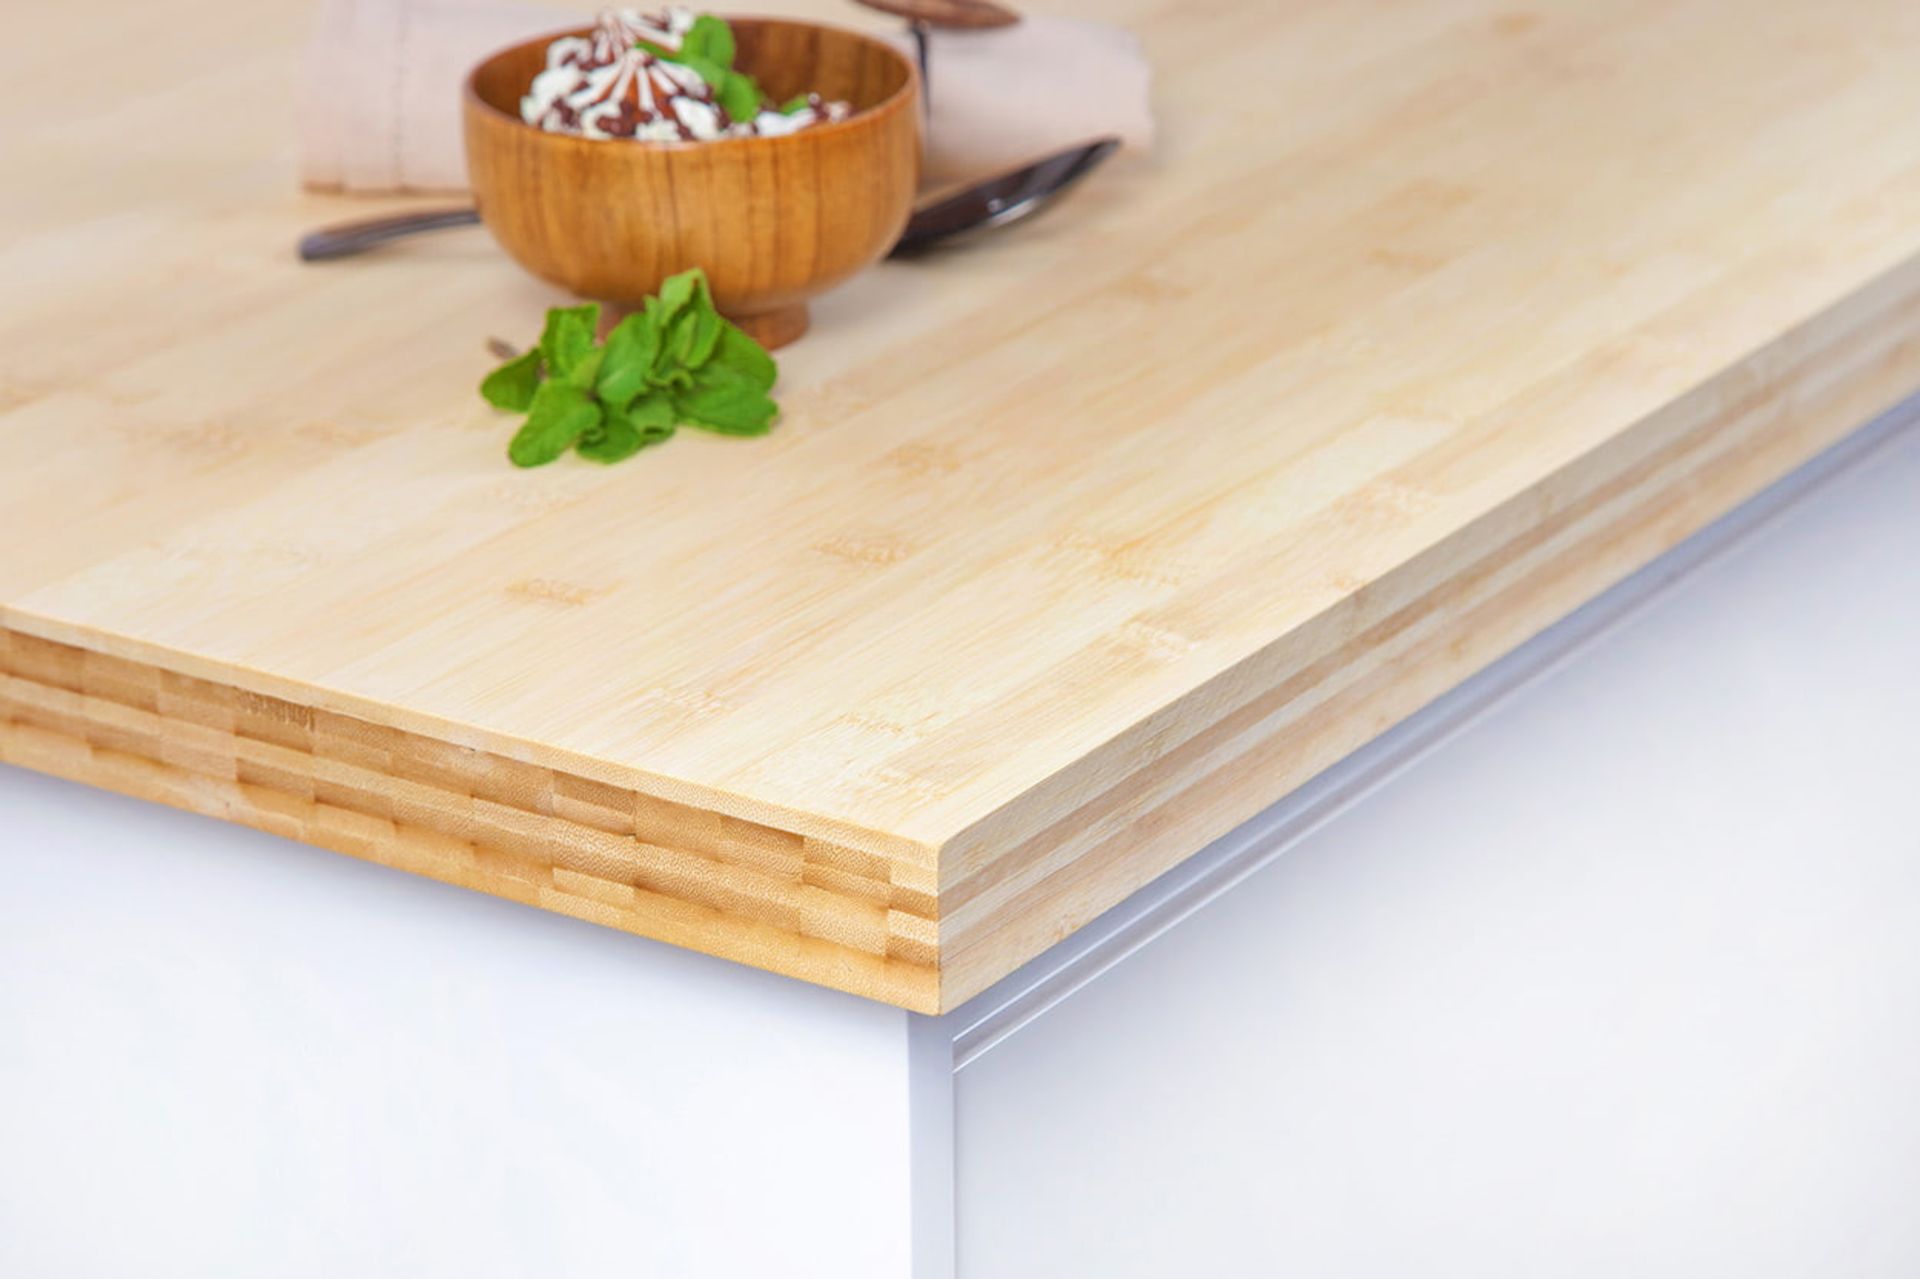 1 x Layered Solid Bamboo Wood Worktop - Size: 3000 x 650 x 40mm - Ideal For Kitchens, Countertops,